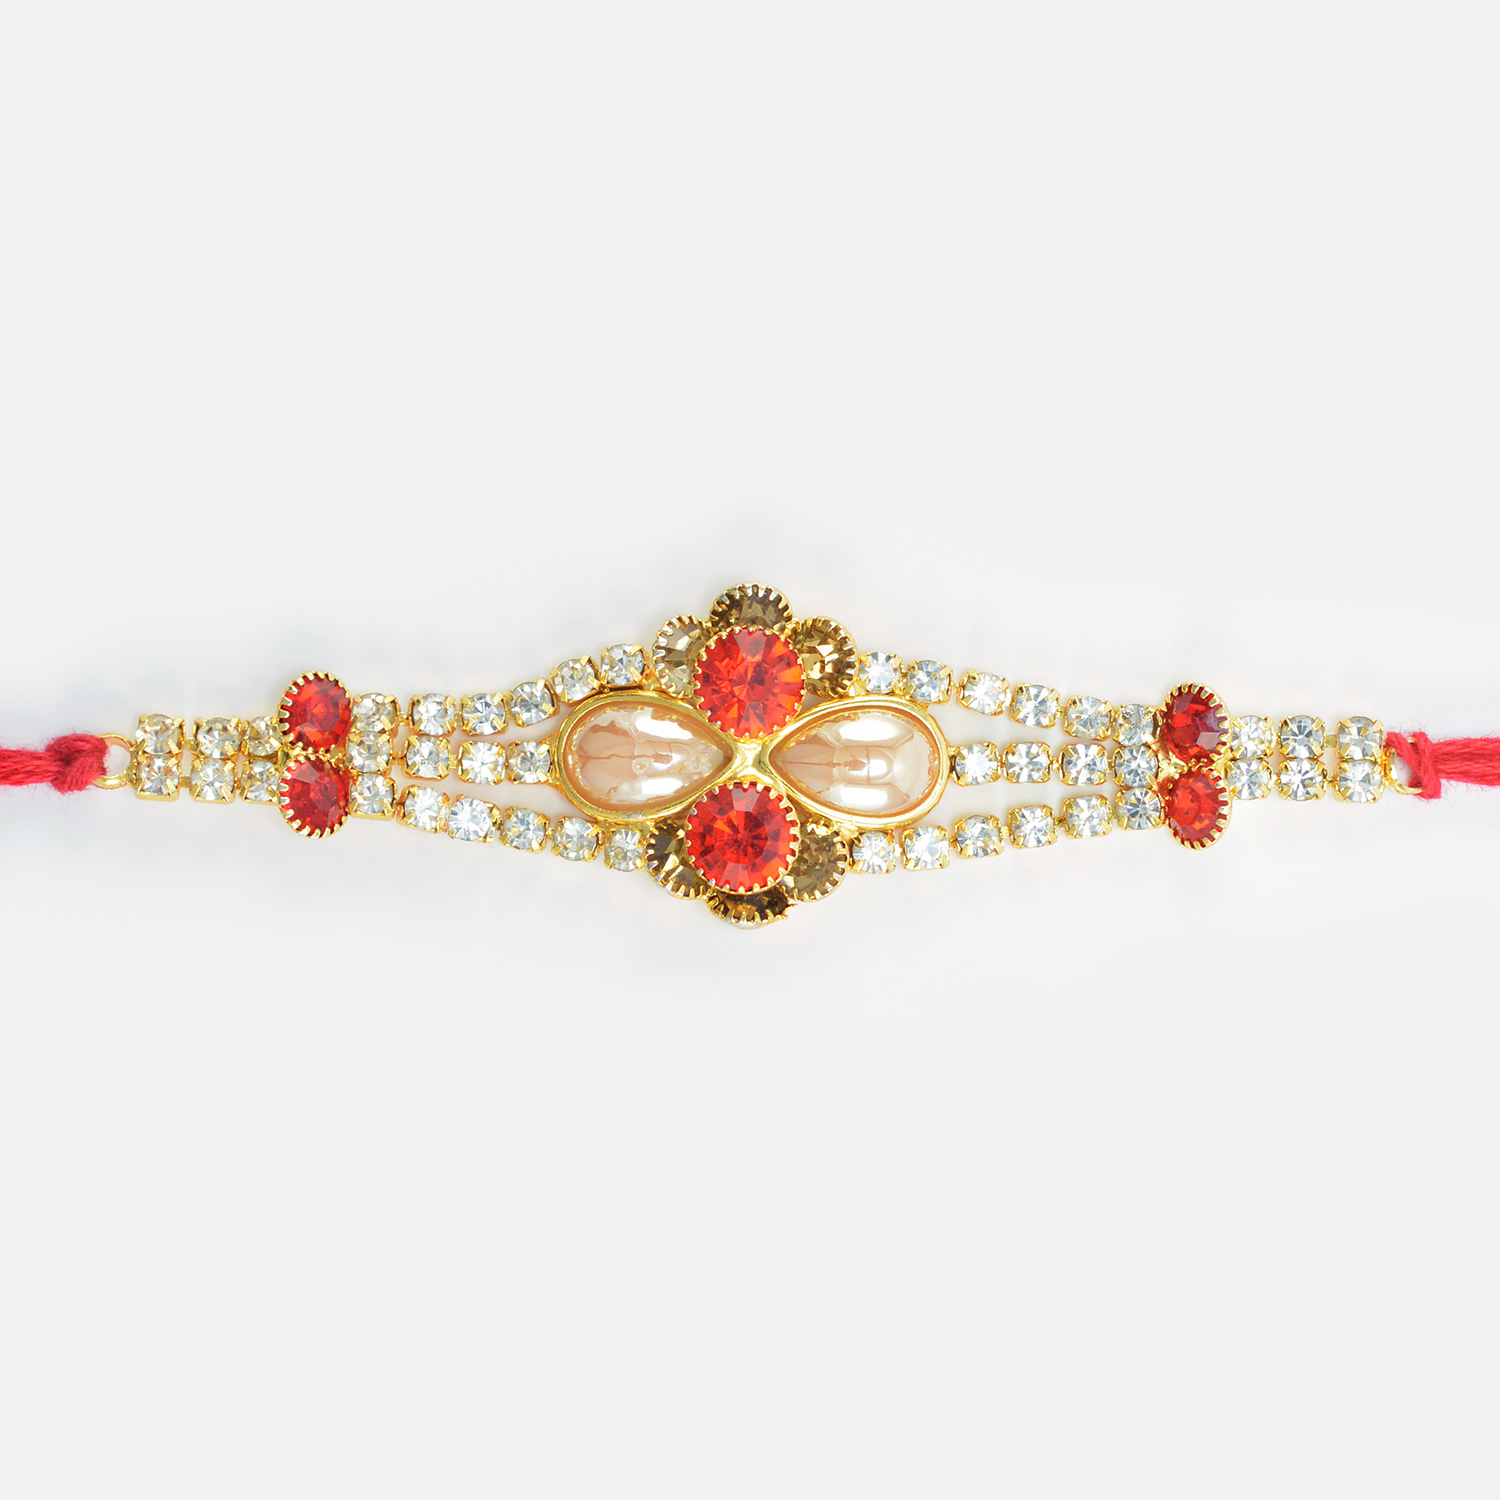 Red and Silver Jewel Studded Rakhi of Pearl and Jewels for Bhai